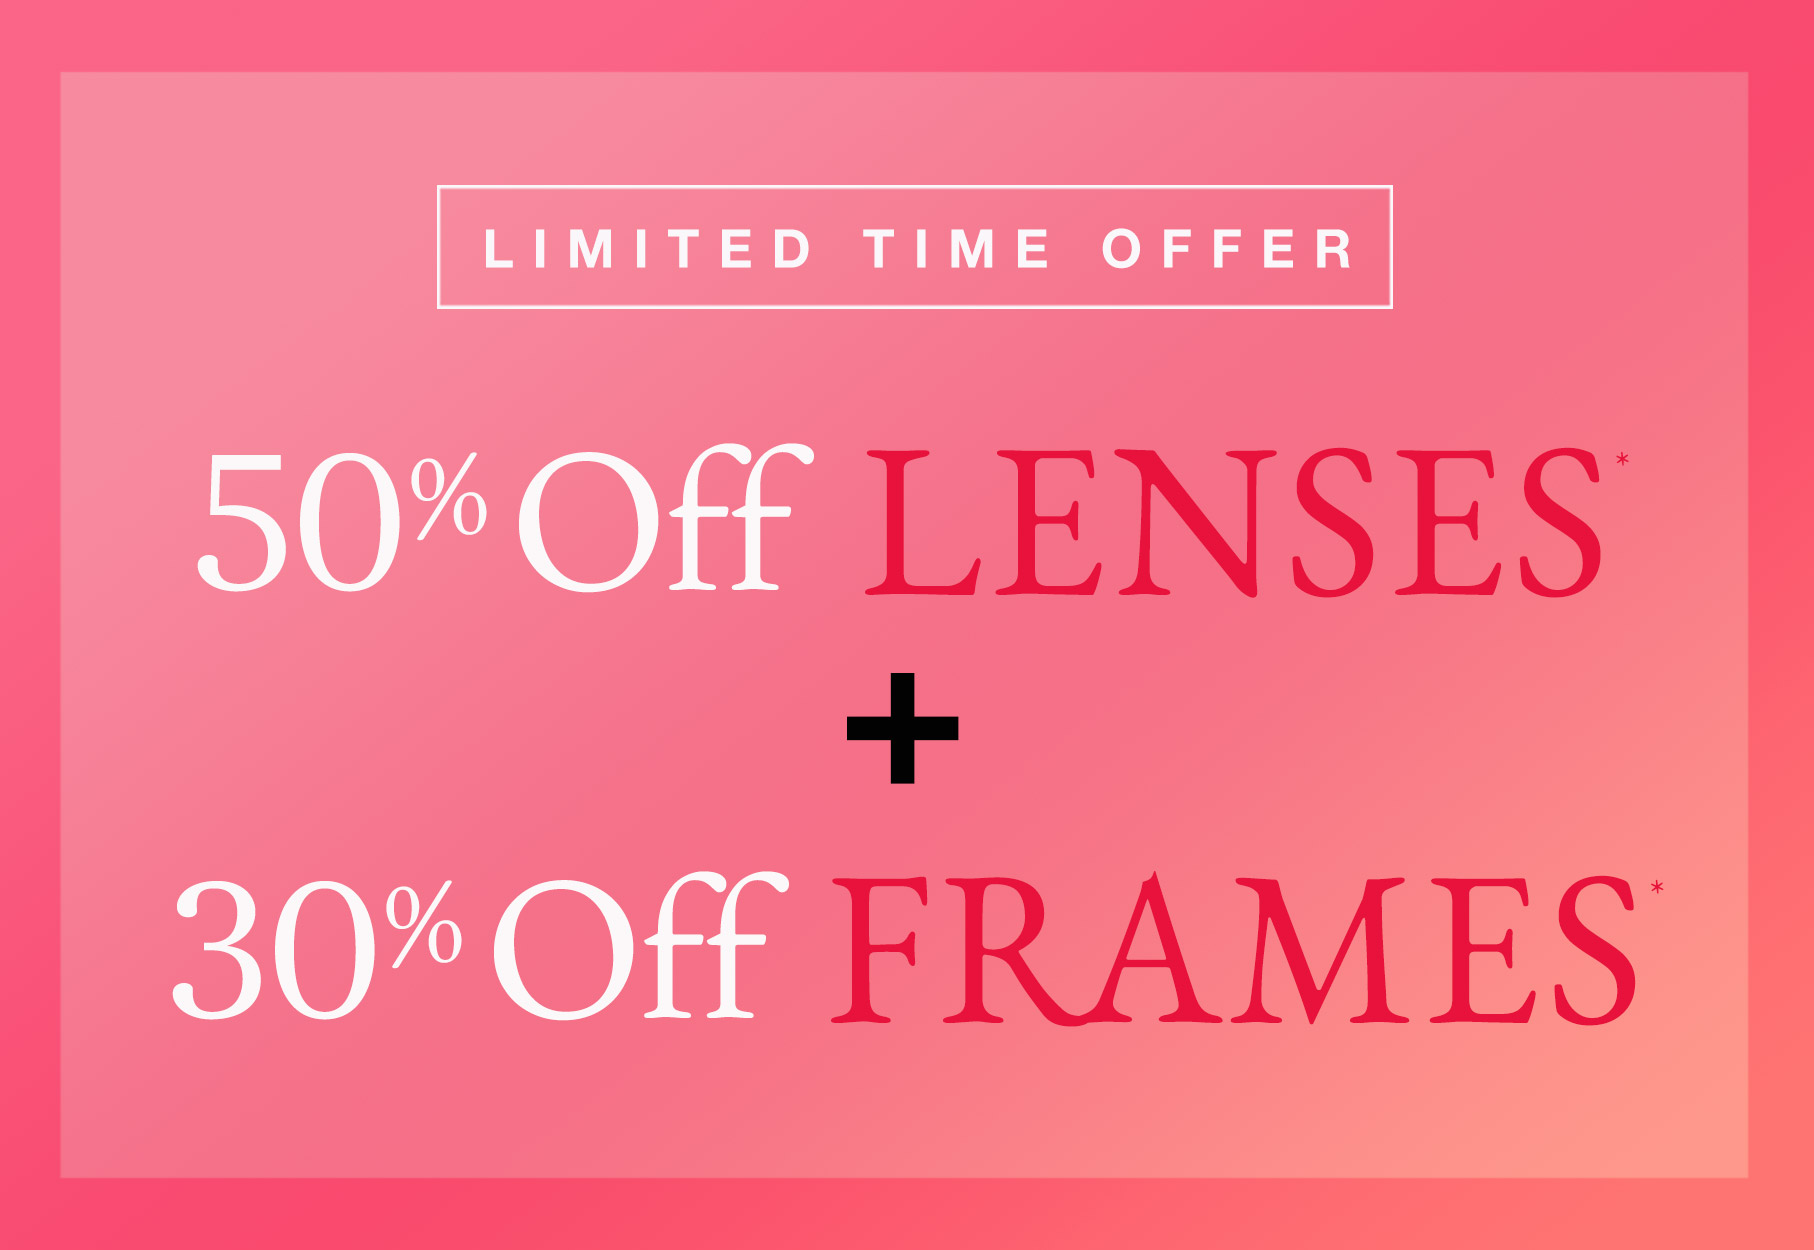 Text: LIMITED TIME OFFER 50% off LENSES + 30% off FRAMES* Photo: Pink border with pink ombre background.